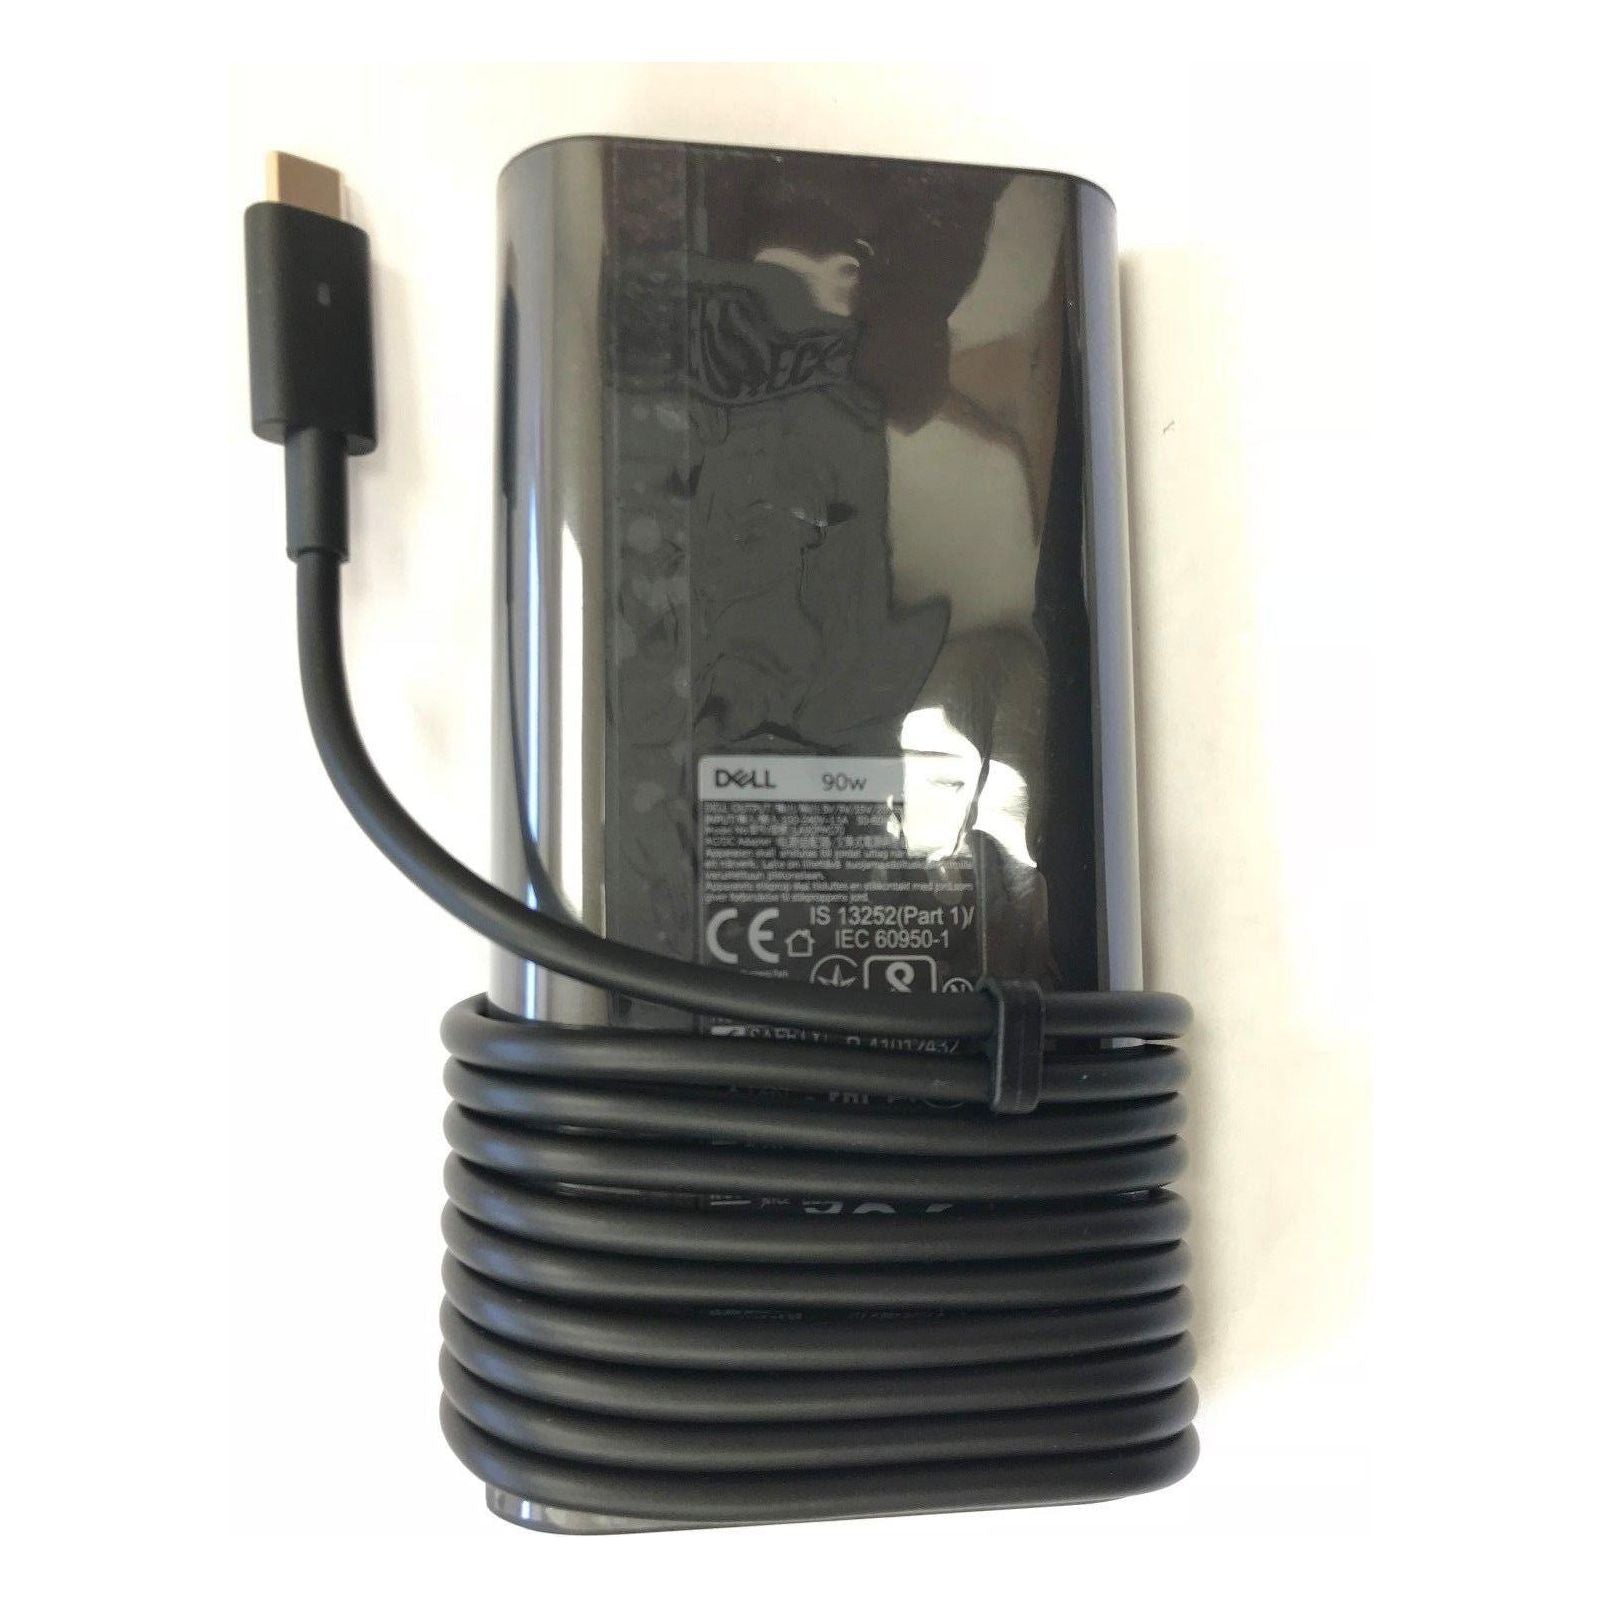 New Genuine Dell AC Adapter Charger LA65NM170 2YKOF 02YKOF LA90PM170 90W